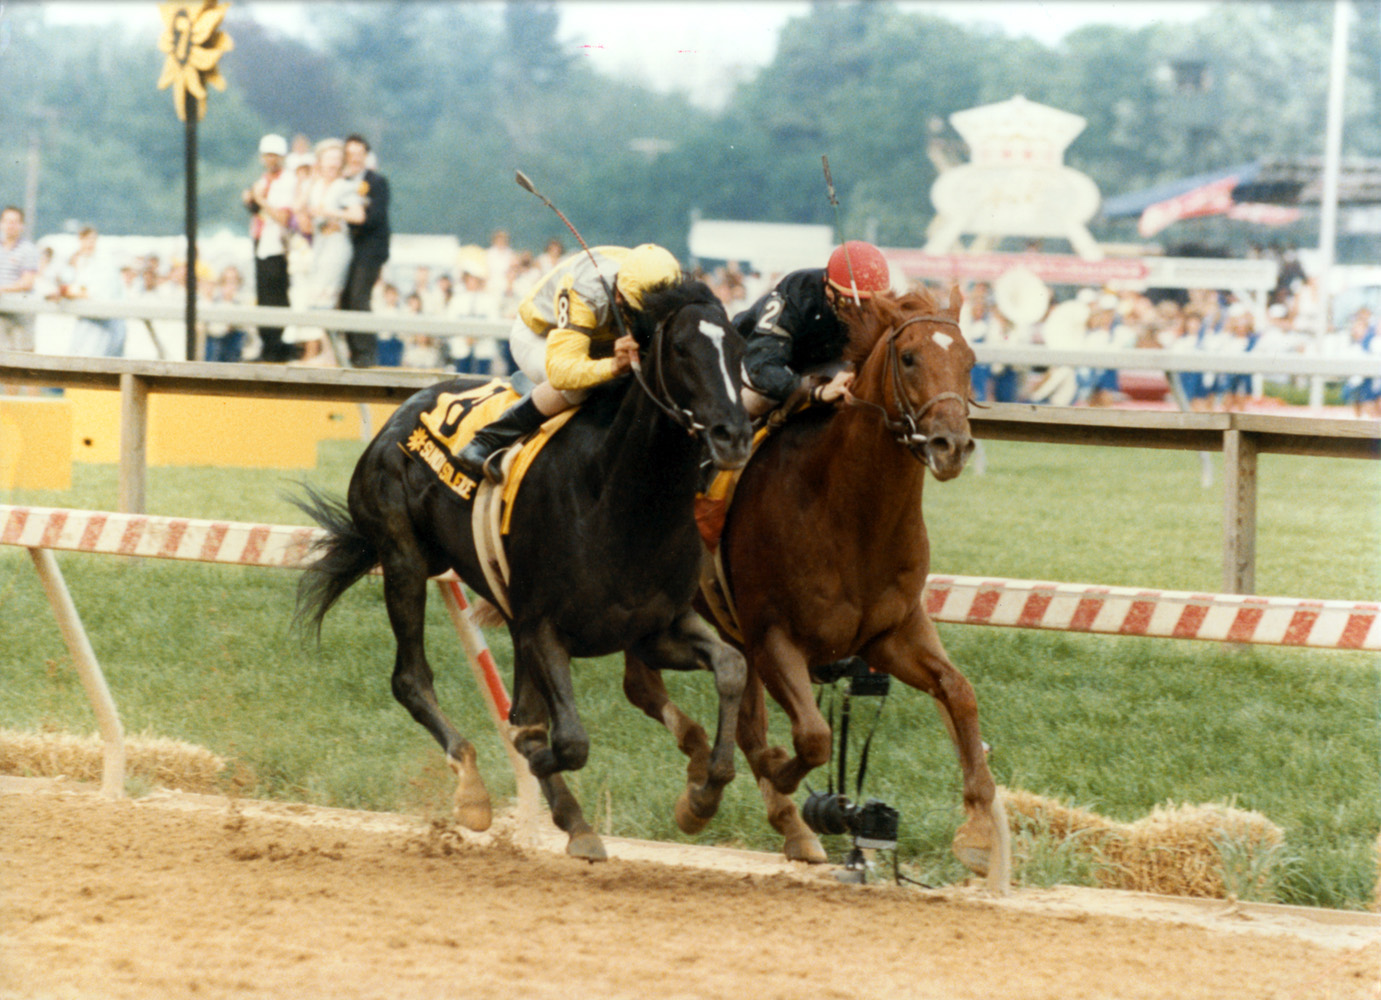 Easy Goer (Pat Day up) dueling Sunday Silence down the stretch in the 1989 Preakness Stakes at Pimlico (Skip Dickstein/Museum Collection)